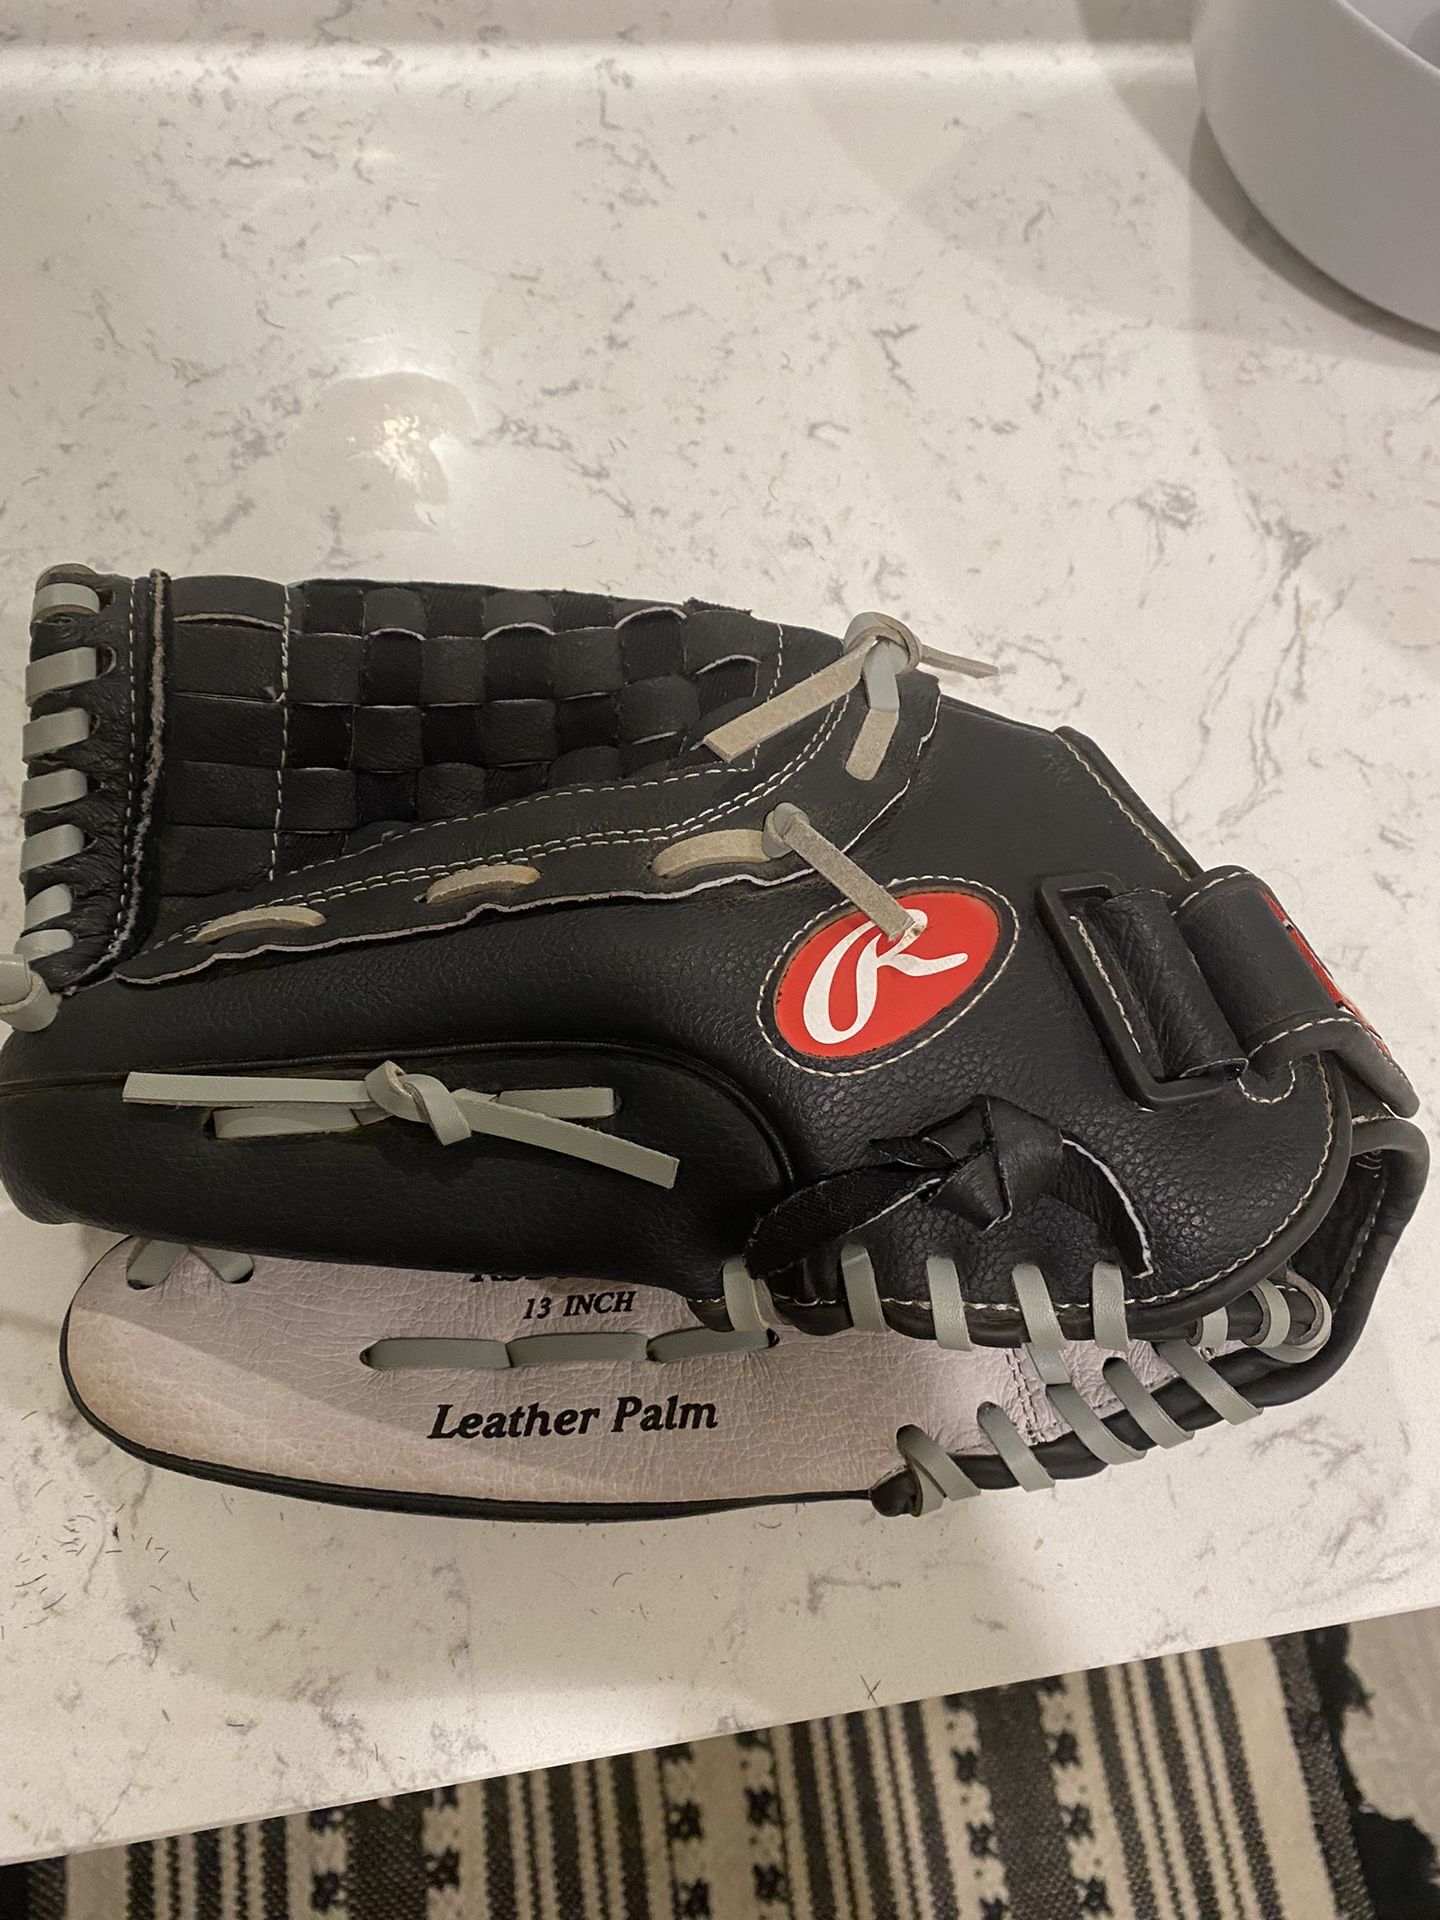 Rawlings Left handed Glove $25.00